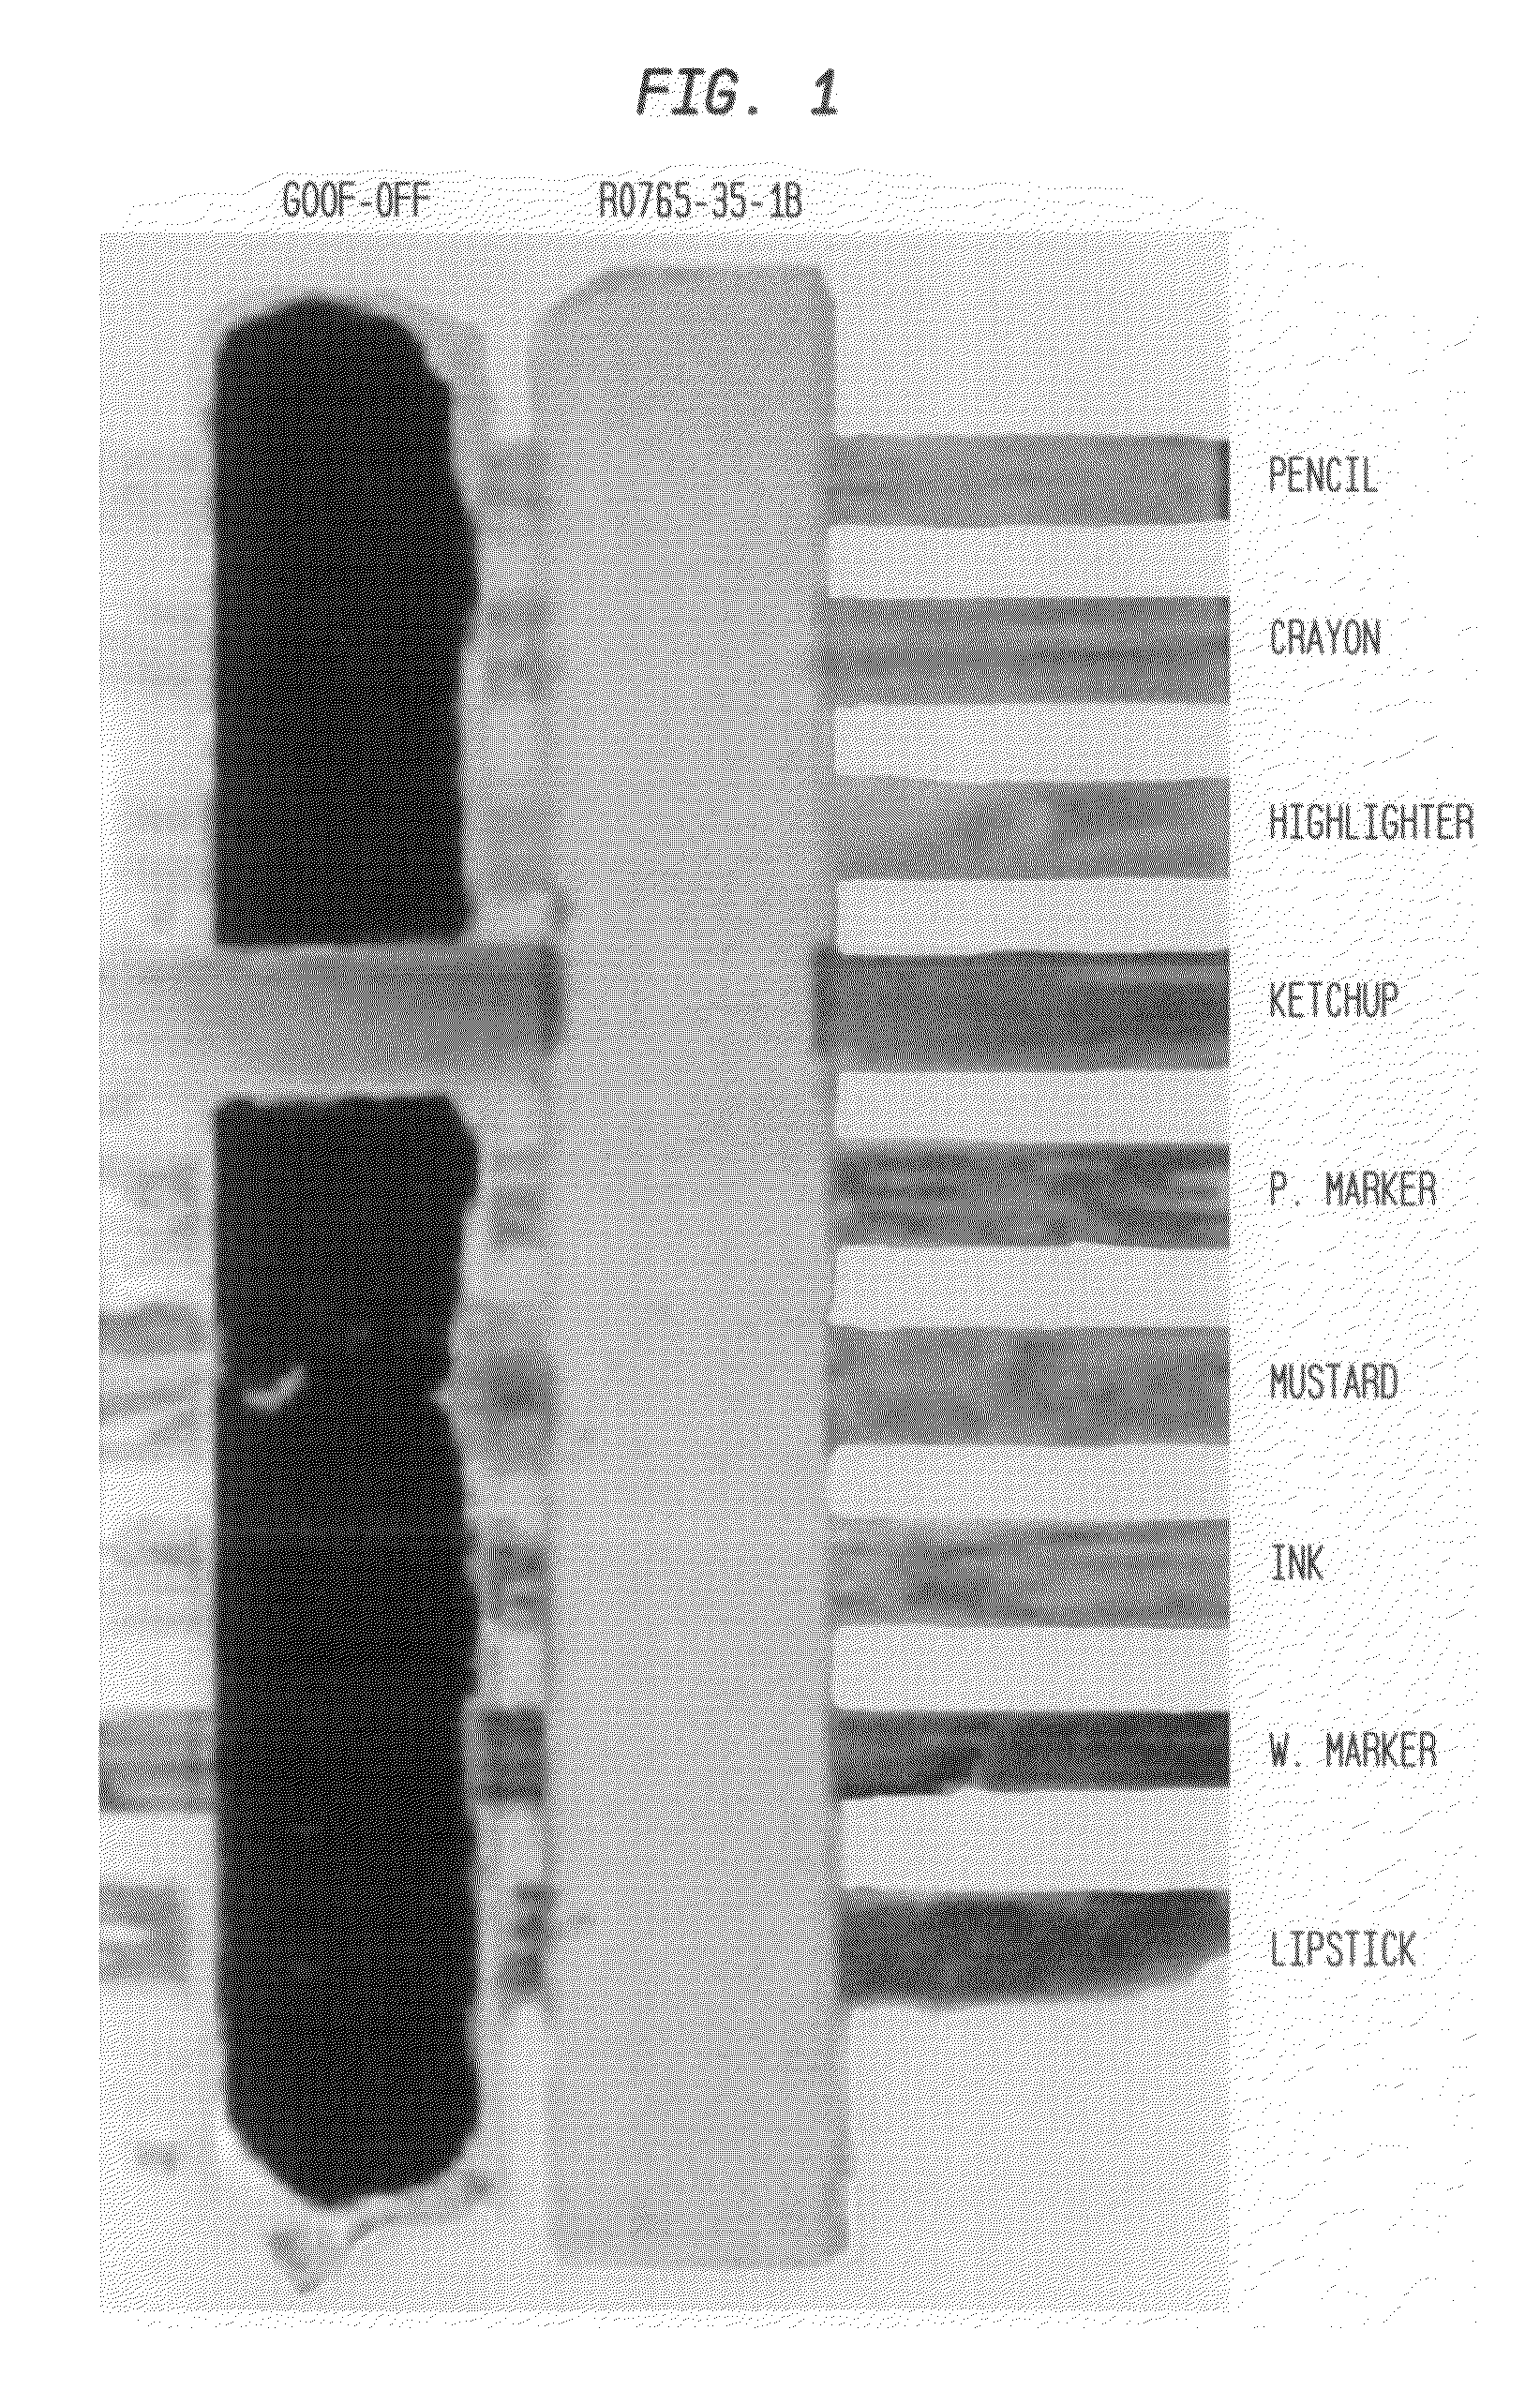 Cleaning compositions incorporating green solvents and methods for use